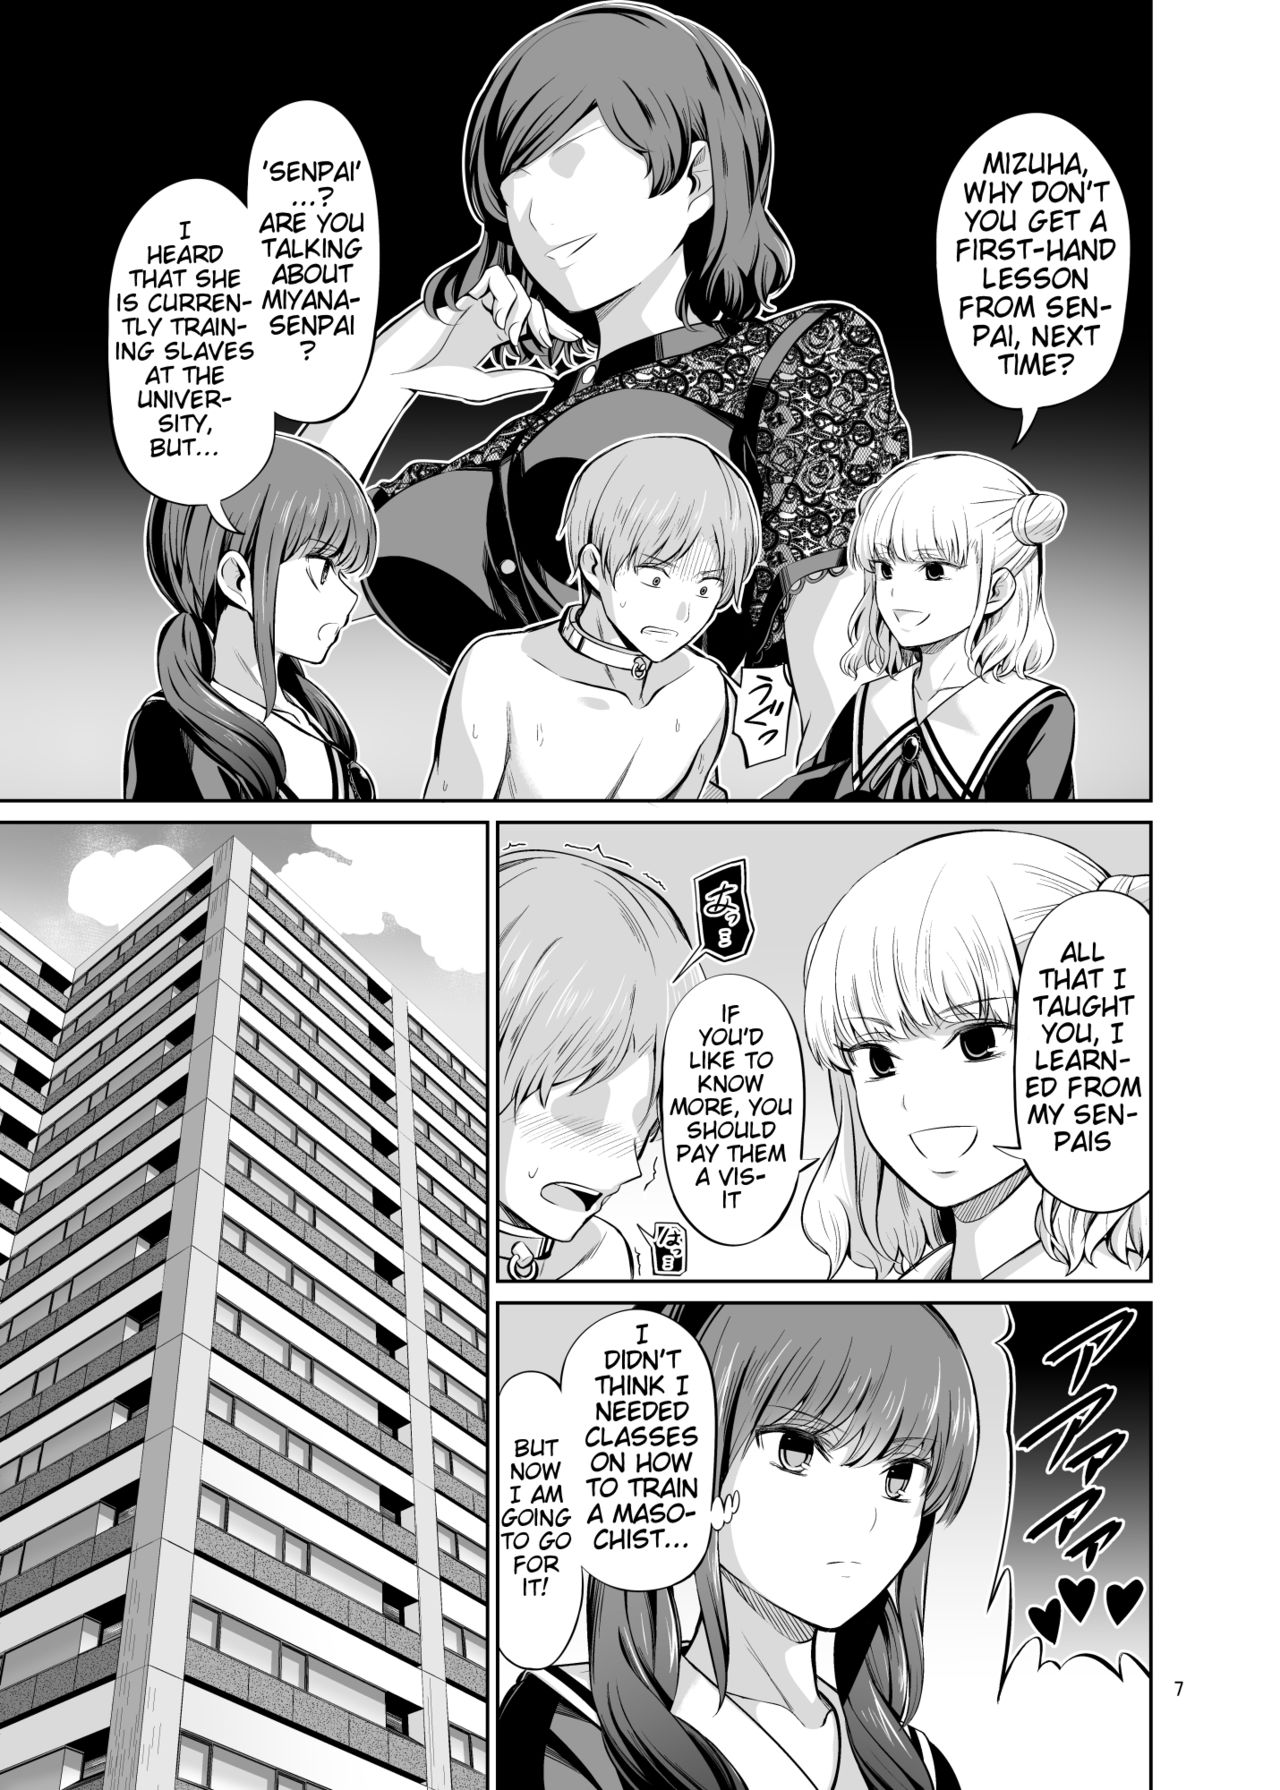 [Yamahata Rian] Tensuushugi no Kuni Kouhen | A Country Based on Point System Sequel [English] [Esoteric_Autist, klow82] page 9 full